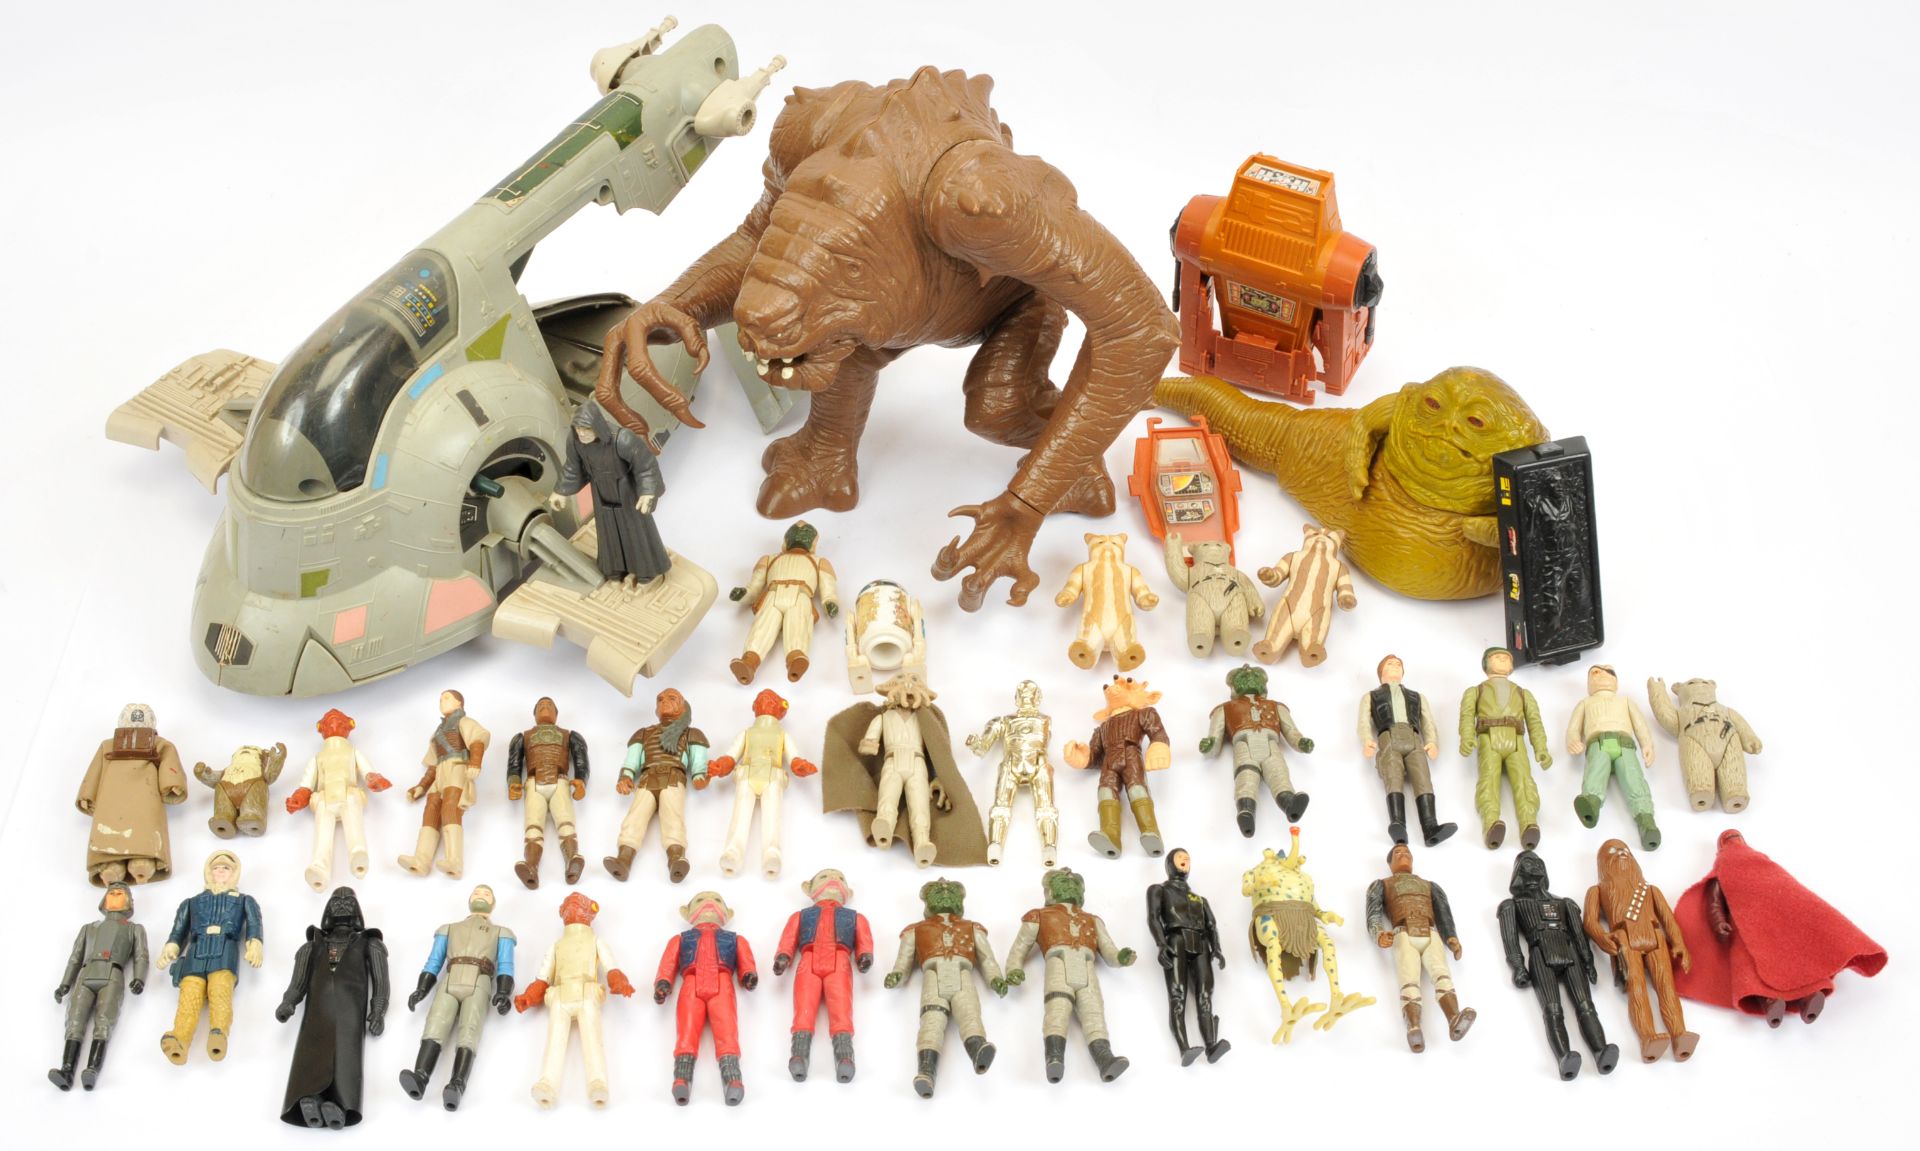 Quantity of Kenner Star Wars vintage vehicles, Creatures and 3 3/4" figures